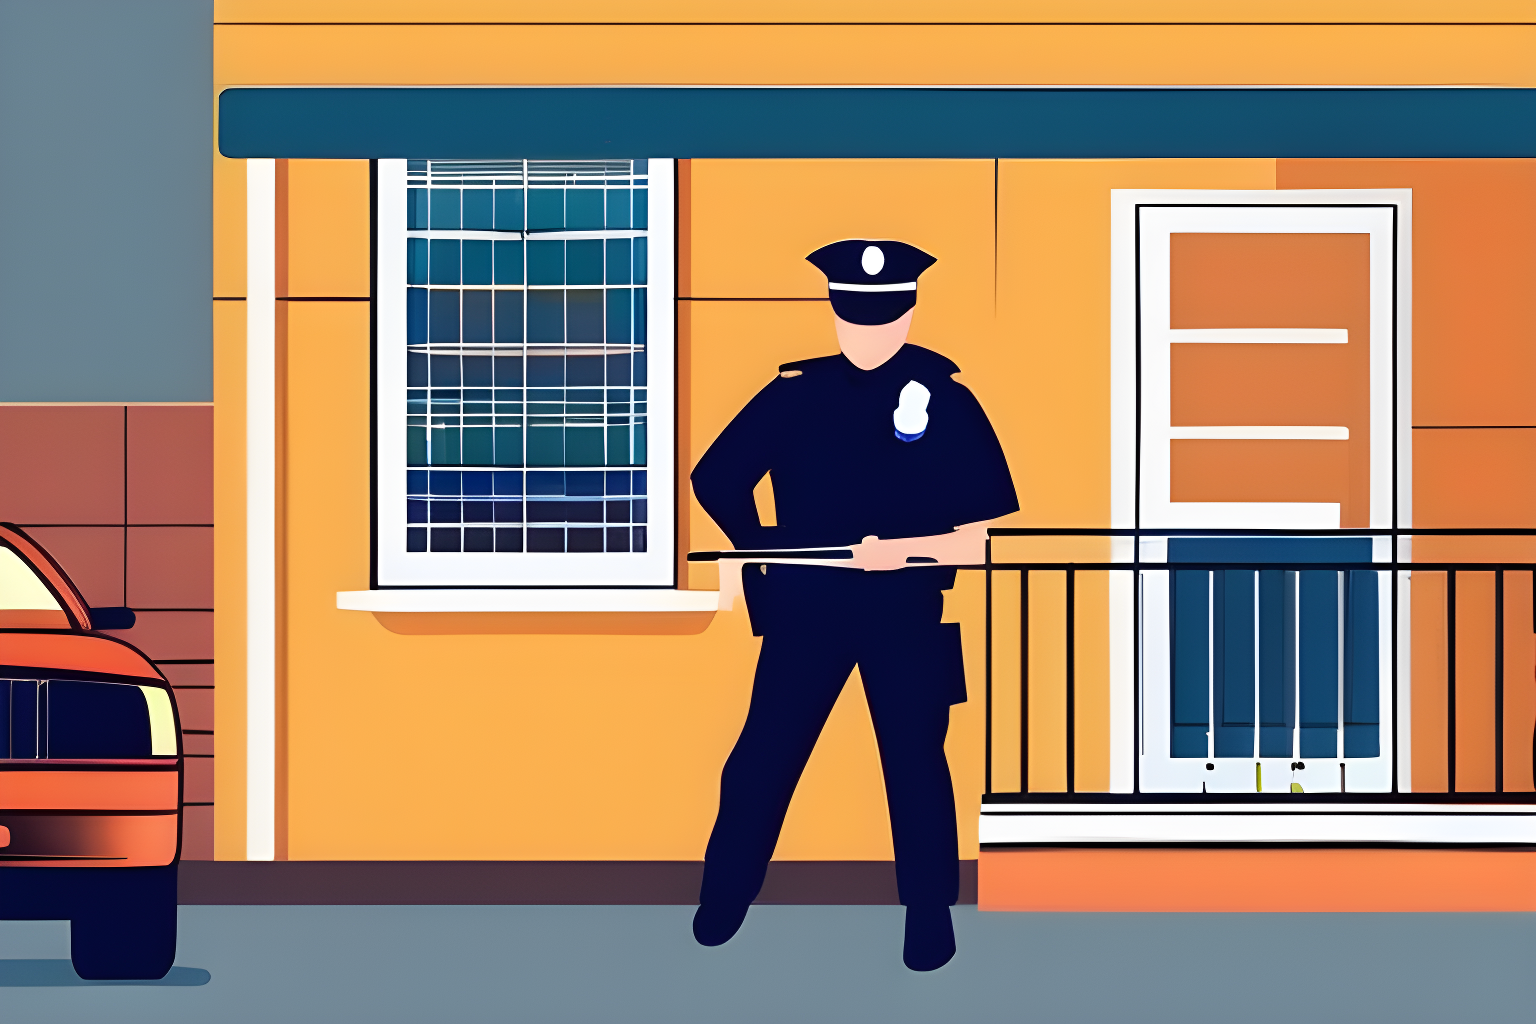 A cop refused entry inside a house